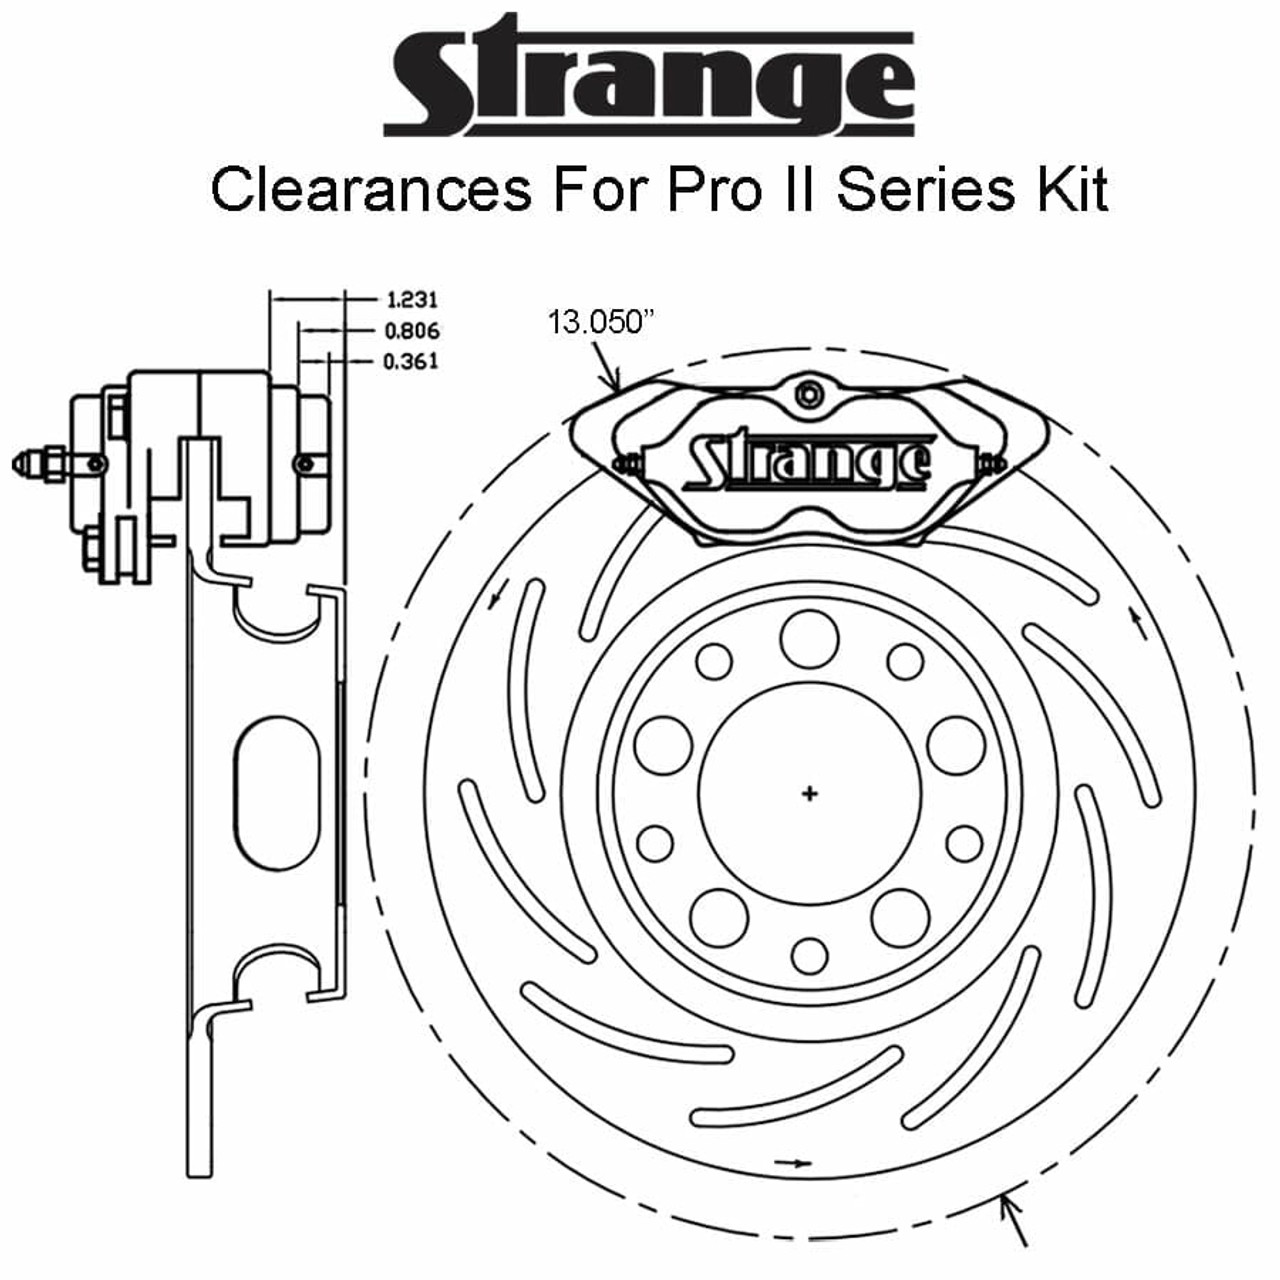 Strange Pro II Rear Brake Kit For 05-14 Mustang With OEM Ends 2 Pc Rotors, 4 Piston Calipers & DRM-35 Metallic Pads